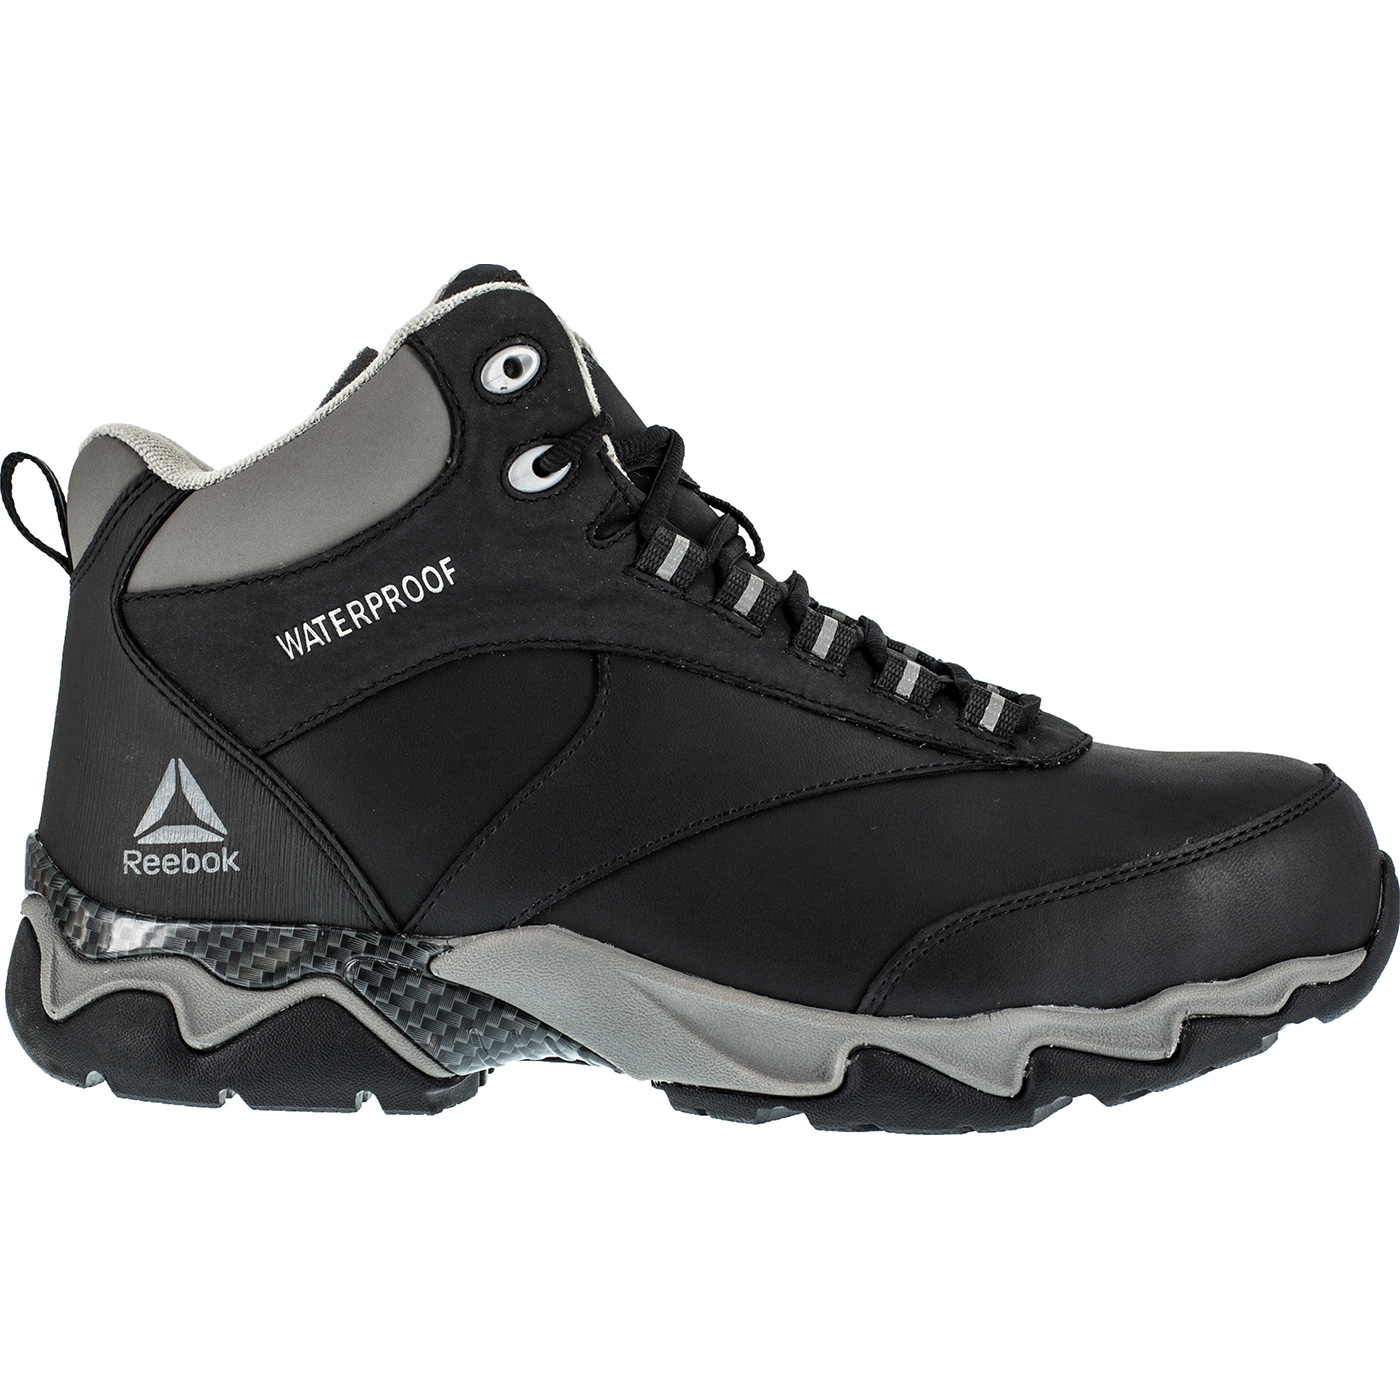 Reebok Work  Mens Beamer Mid Composite Toe Eh  Work Safety Shoes Casual - image 5 of 5